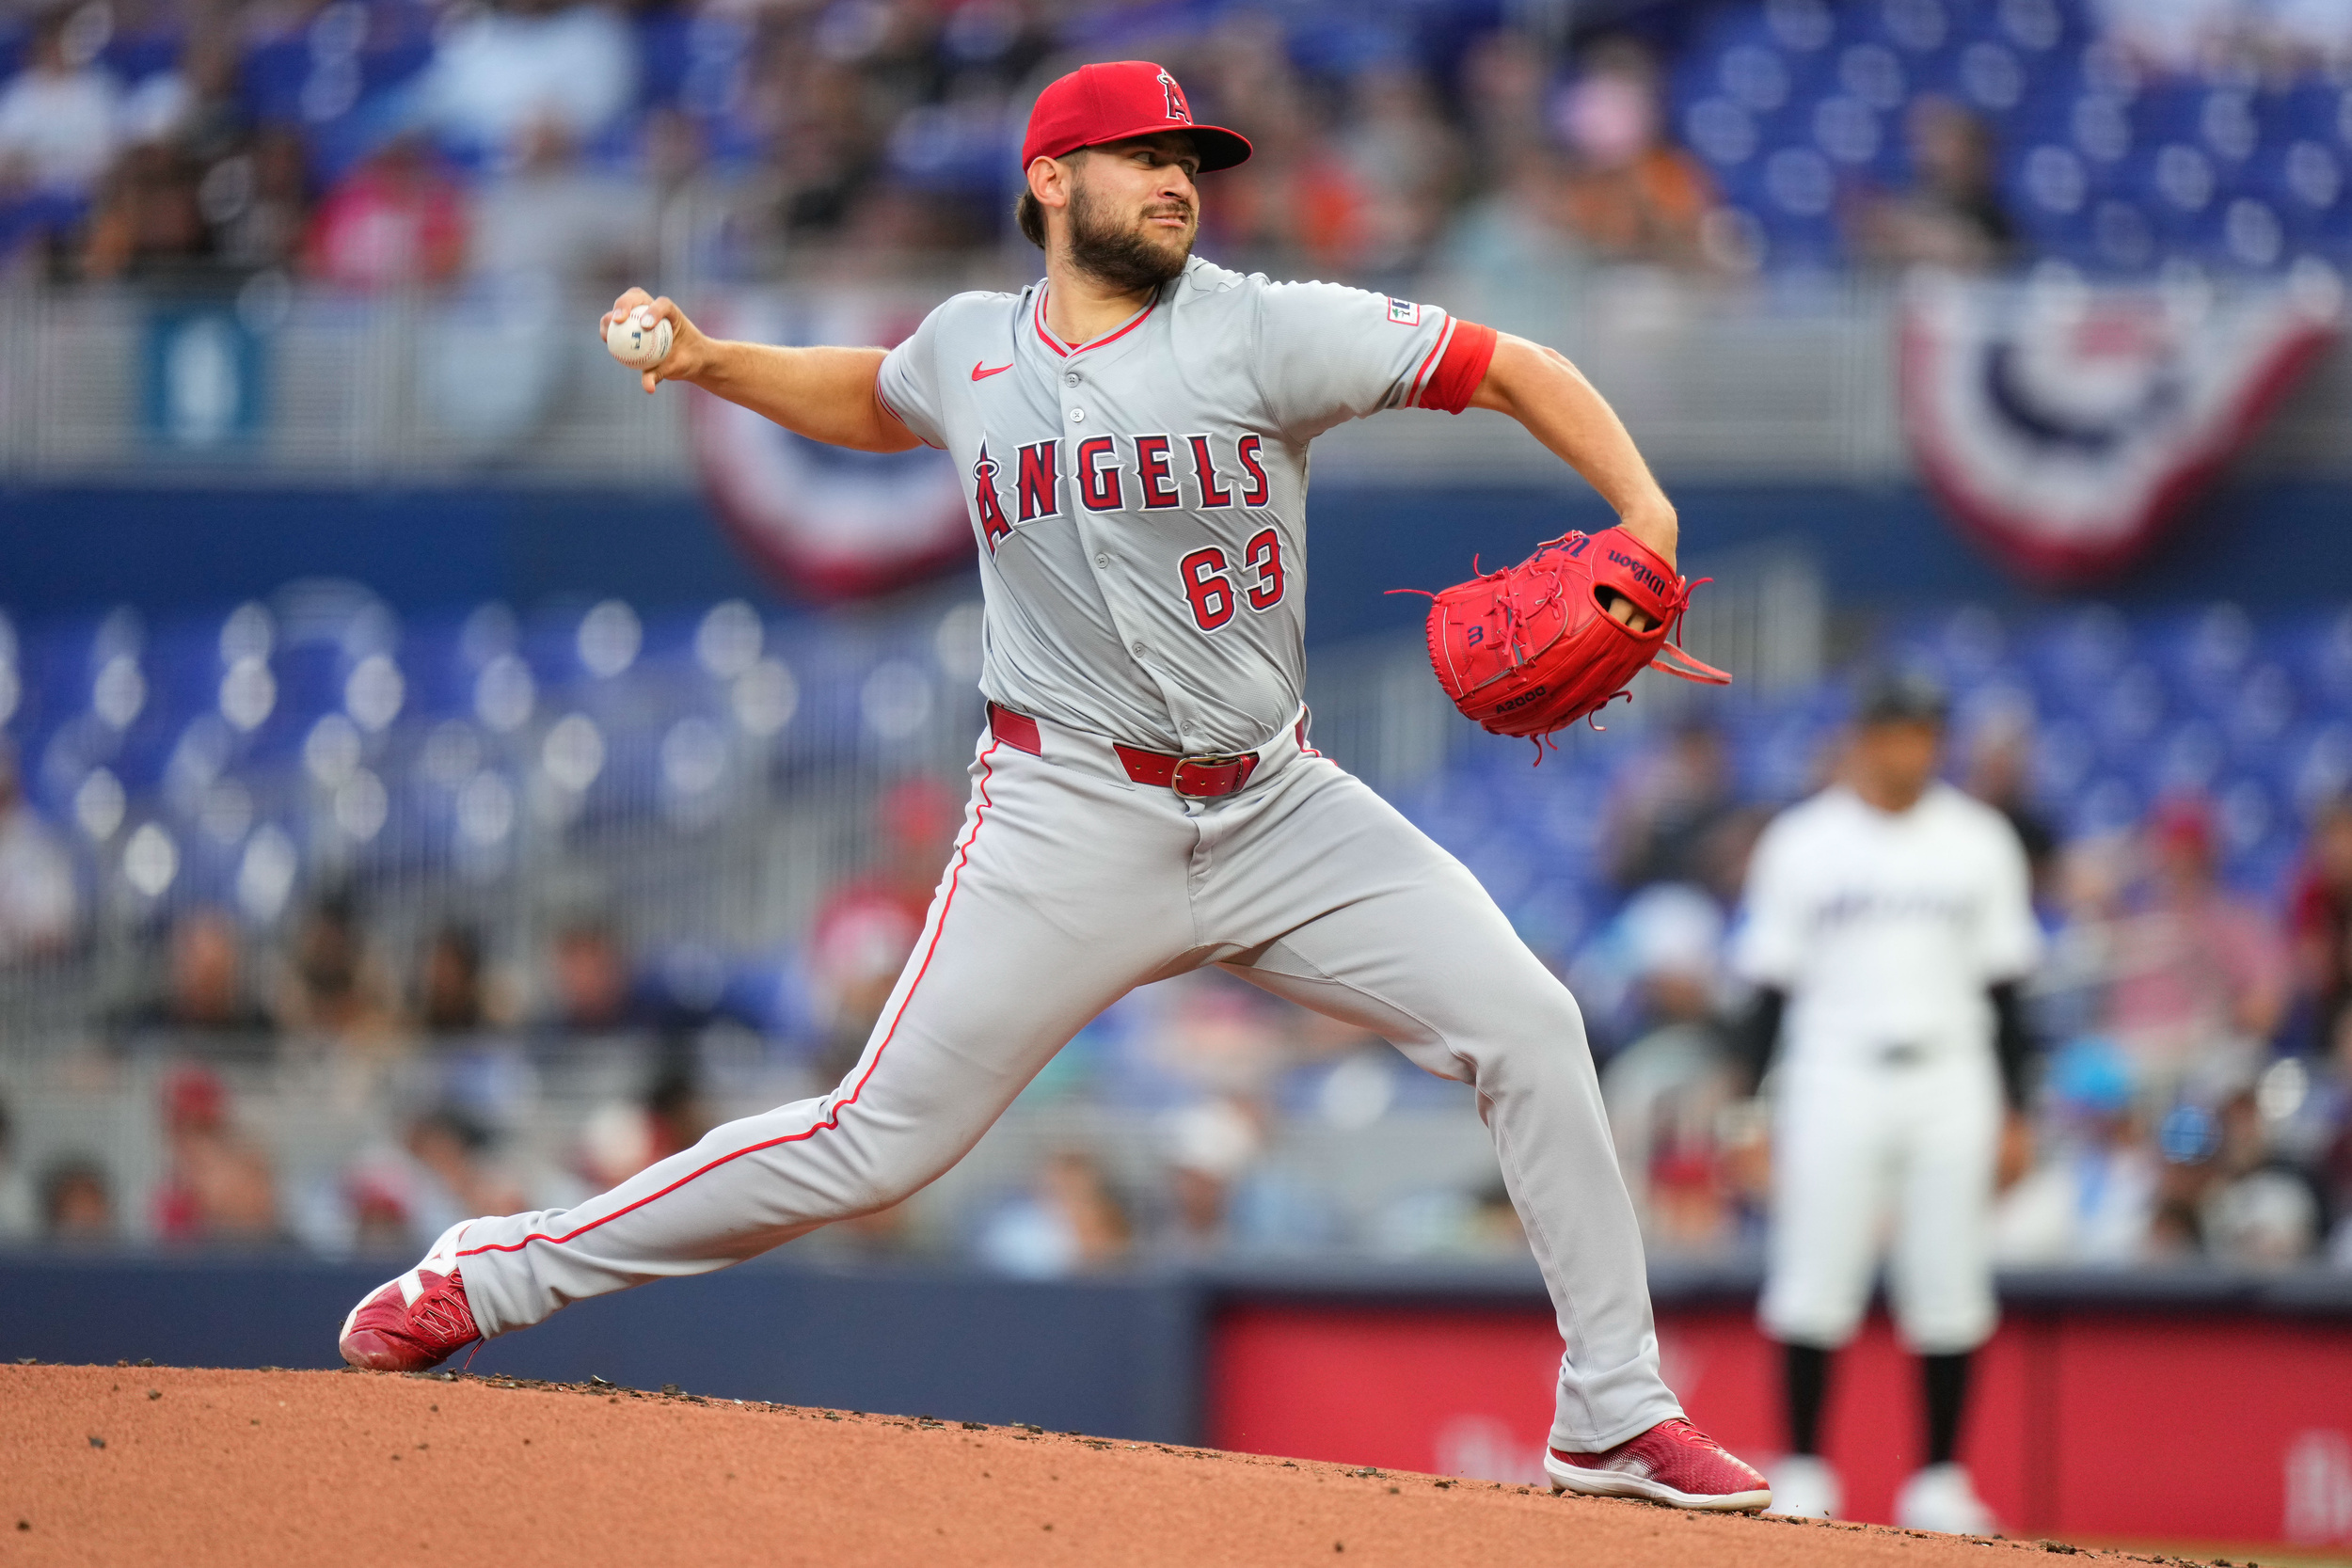 angels place two pitchers on injured list